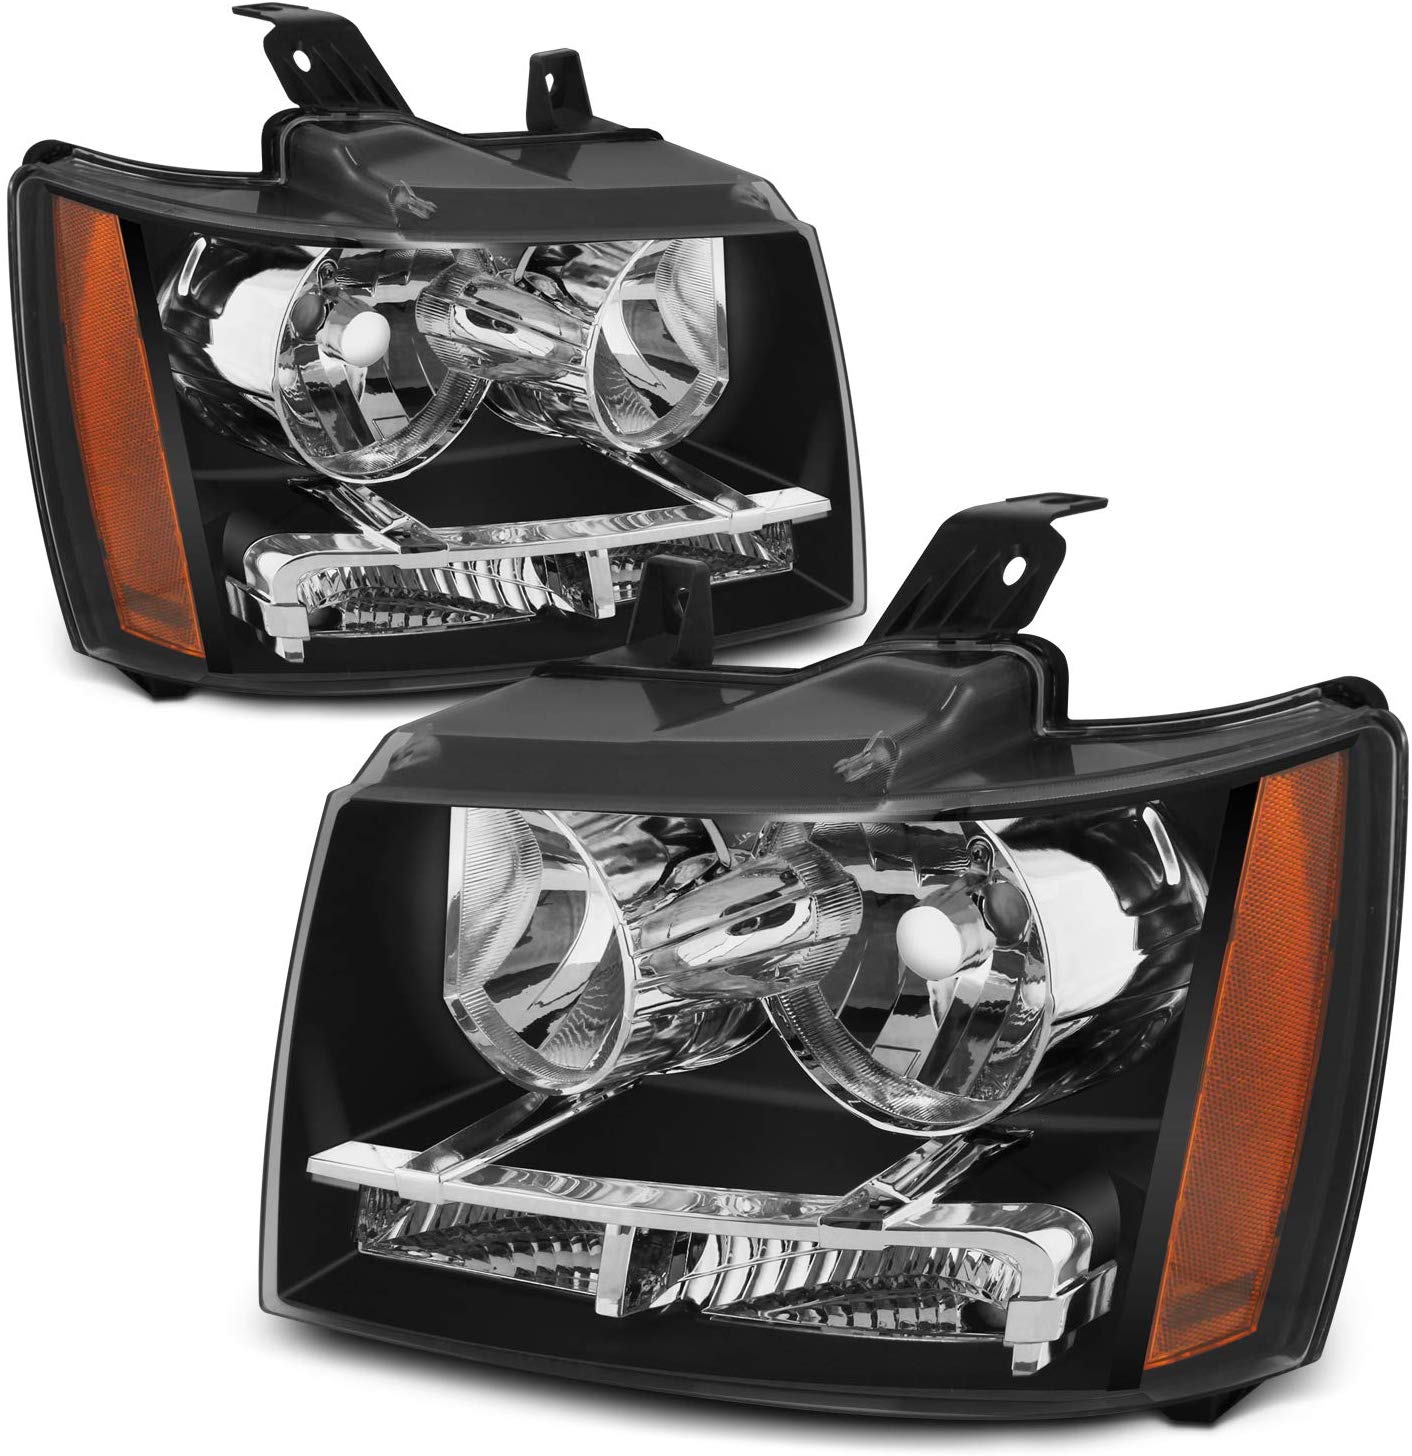 For Black Bezel 07-13 Suburban Tahoe Avalanche Headlights Front Lamps Direct Replacement Left + Right